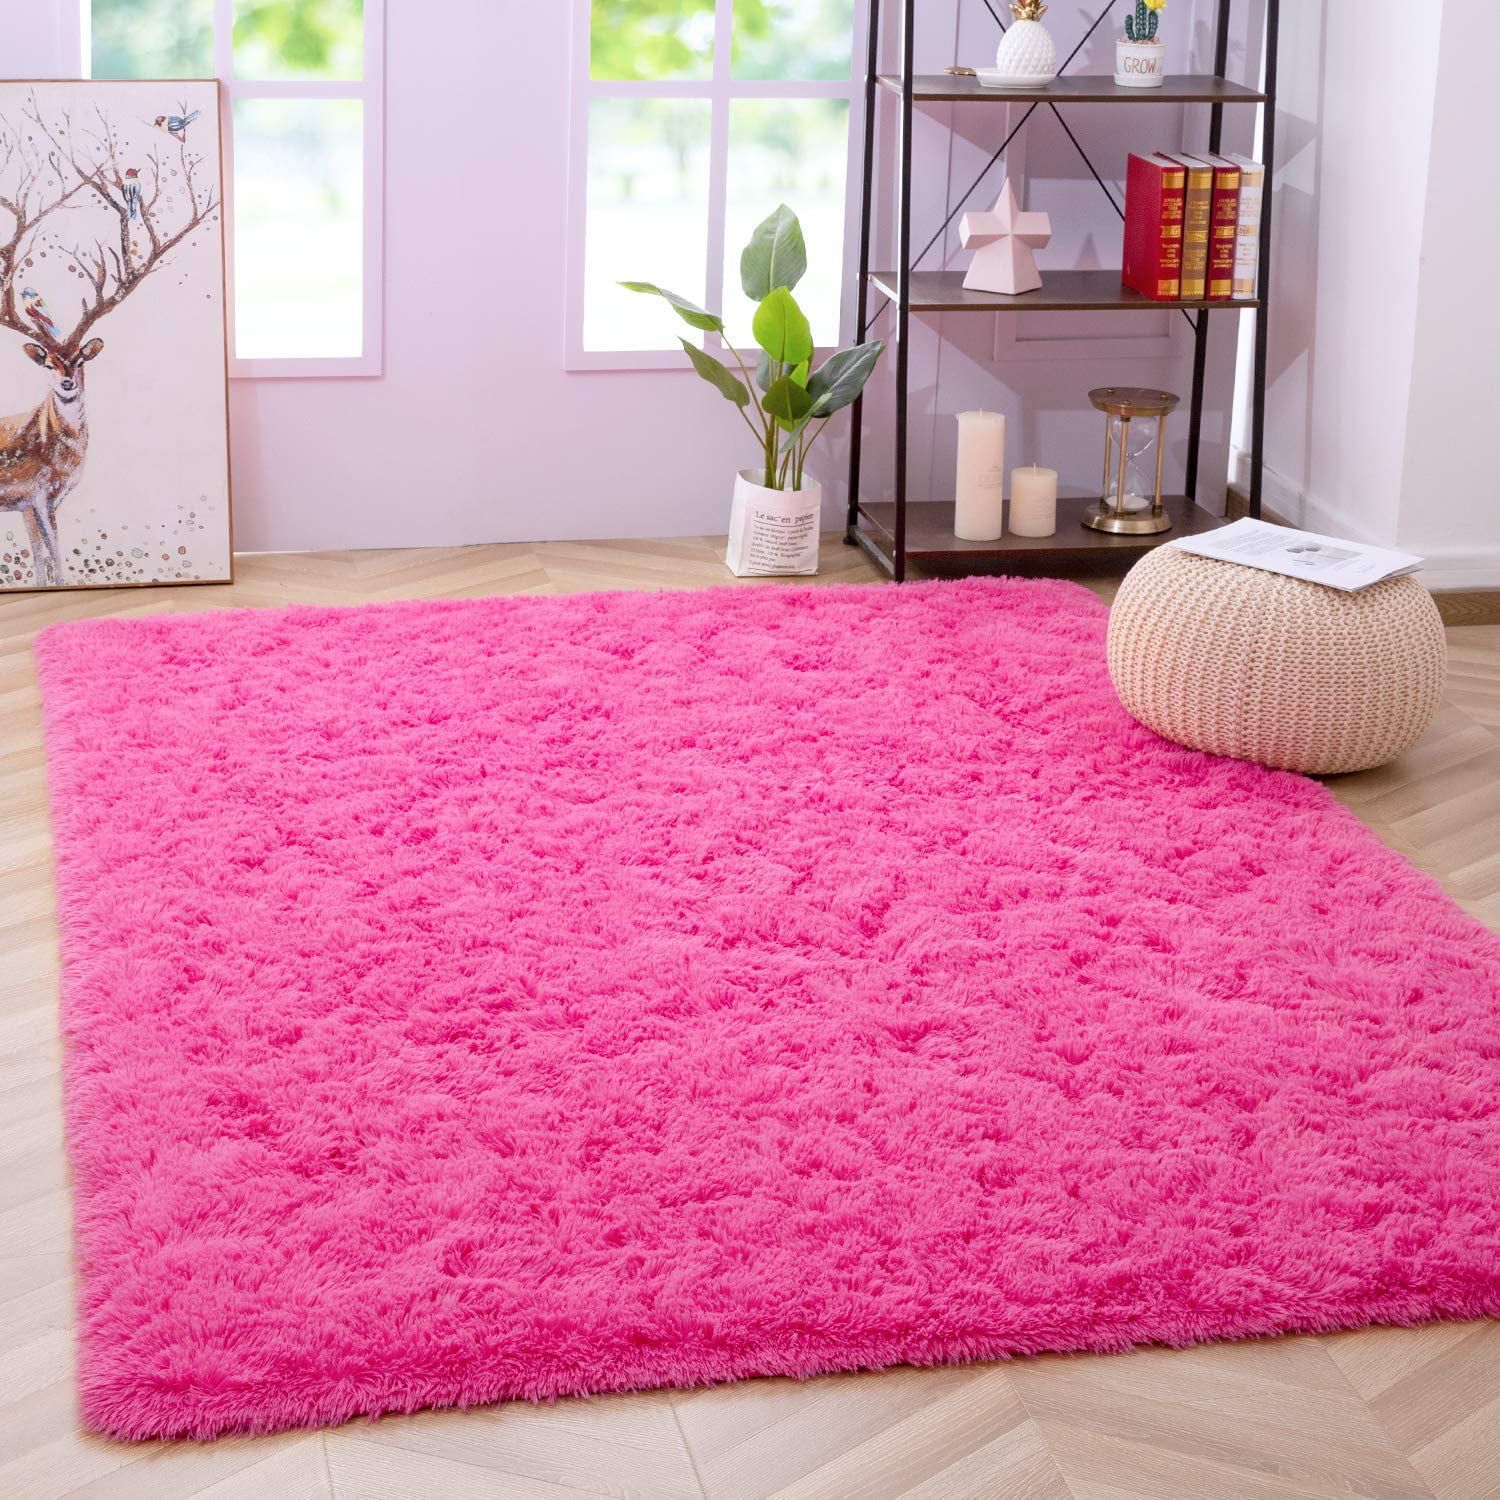 Lochas Luxury Fluffy Rugs Ultra Soft Shag Rug For Bedroom Living Room Kids  Room, Children,6'X9',Hot Pink – Walmart For Pink Soft Touch Shag Rugs (View 12 of 15)